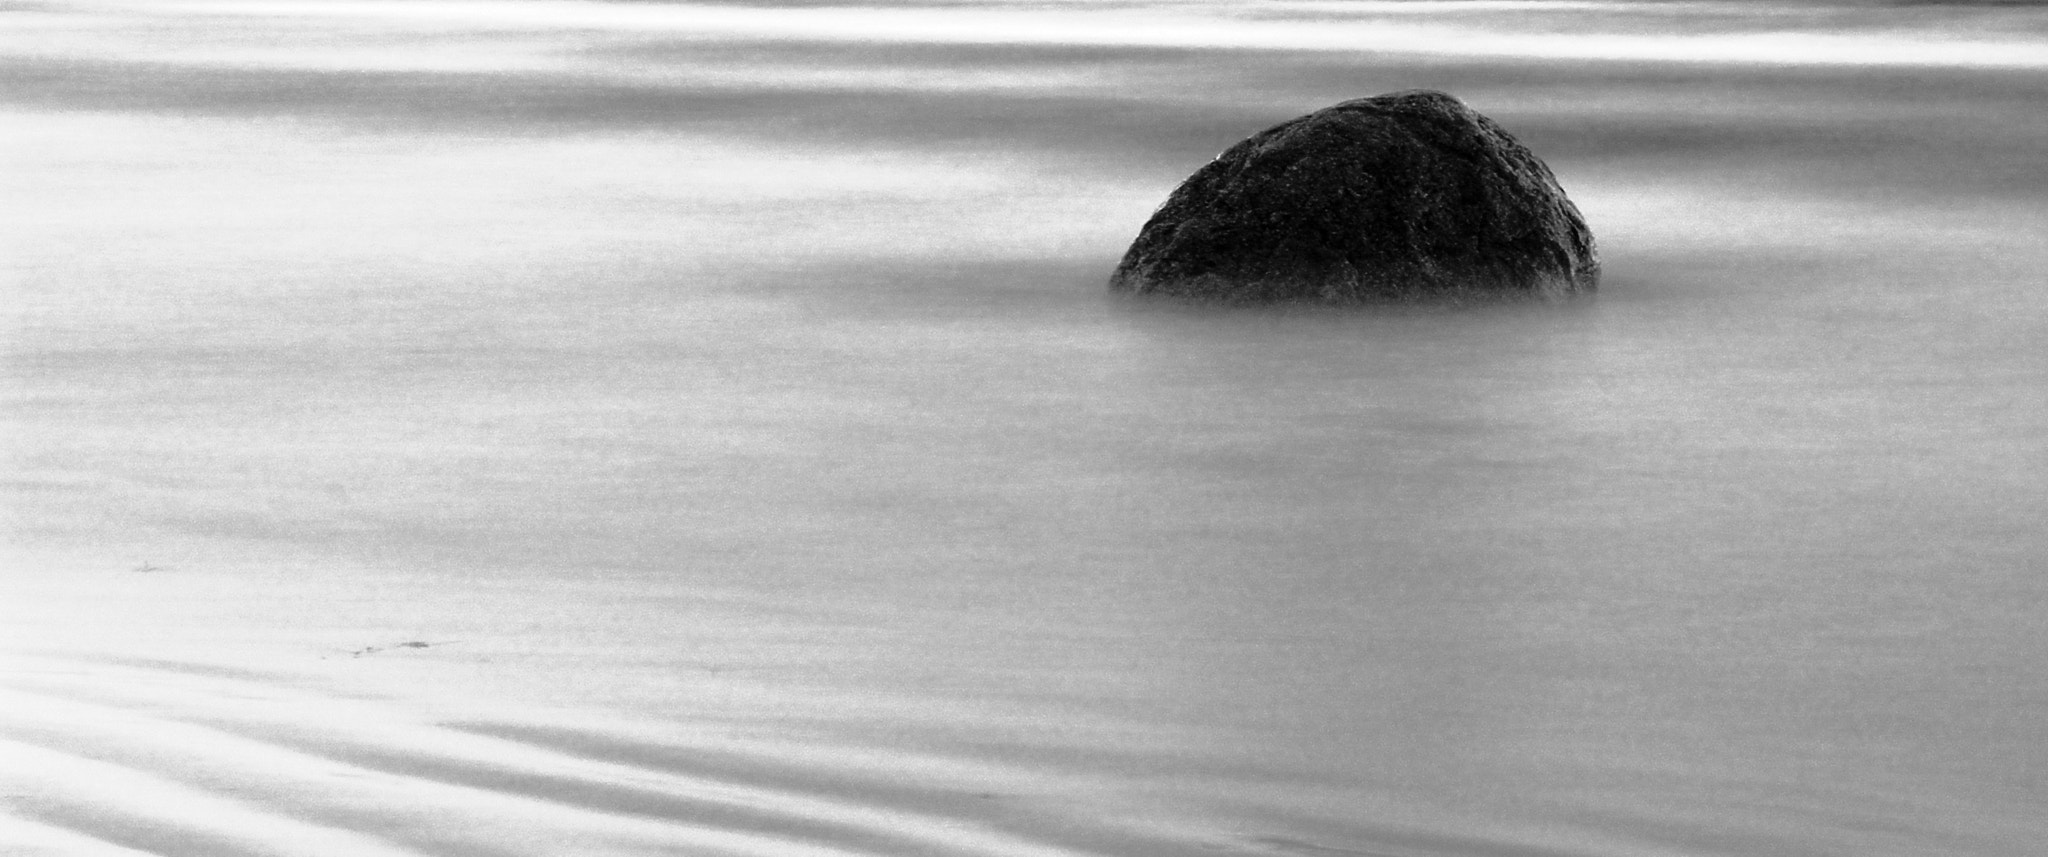 Pentax K100D Super sample photo. Mysterious rock and wave patterns photography